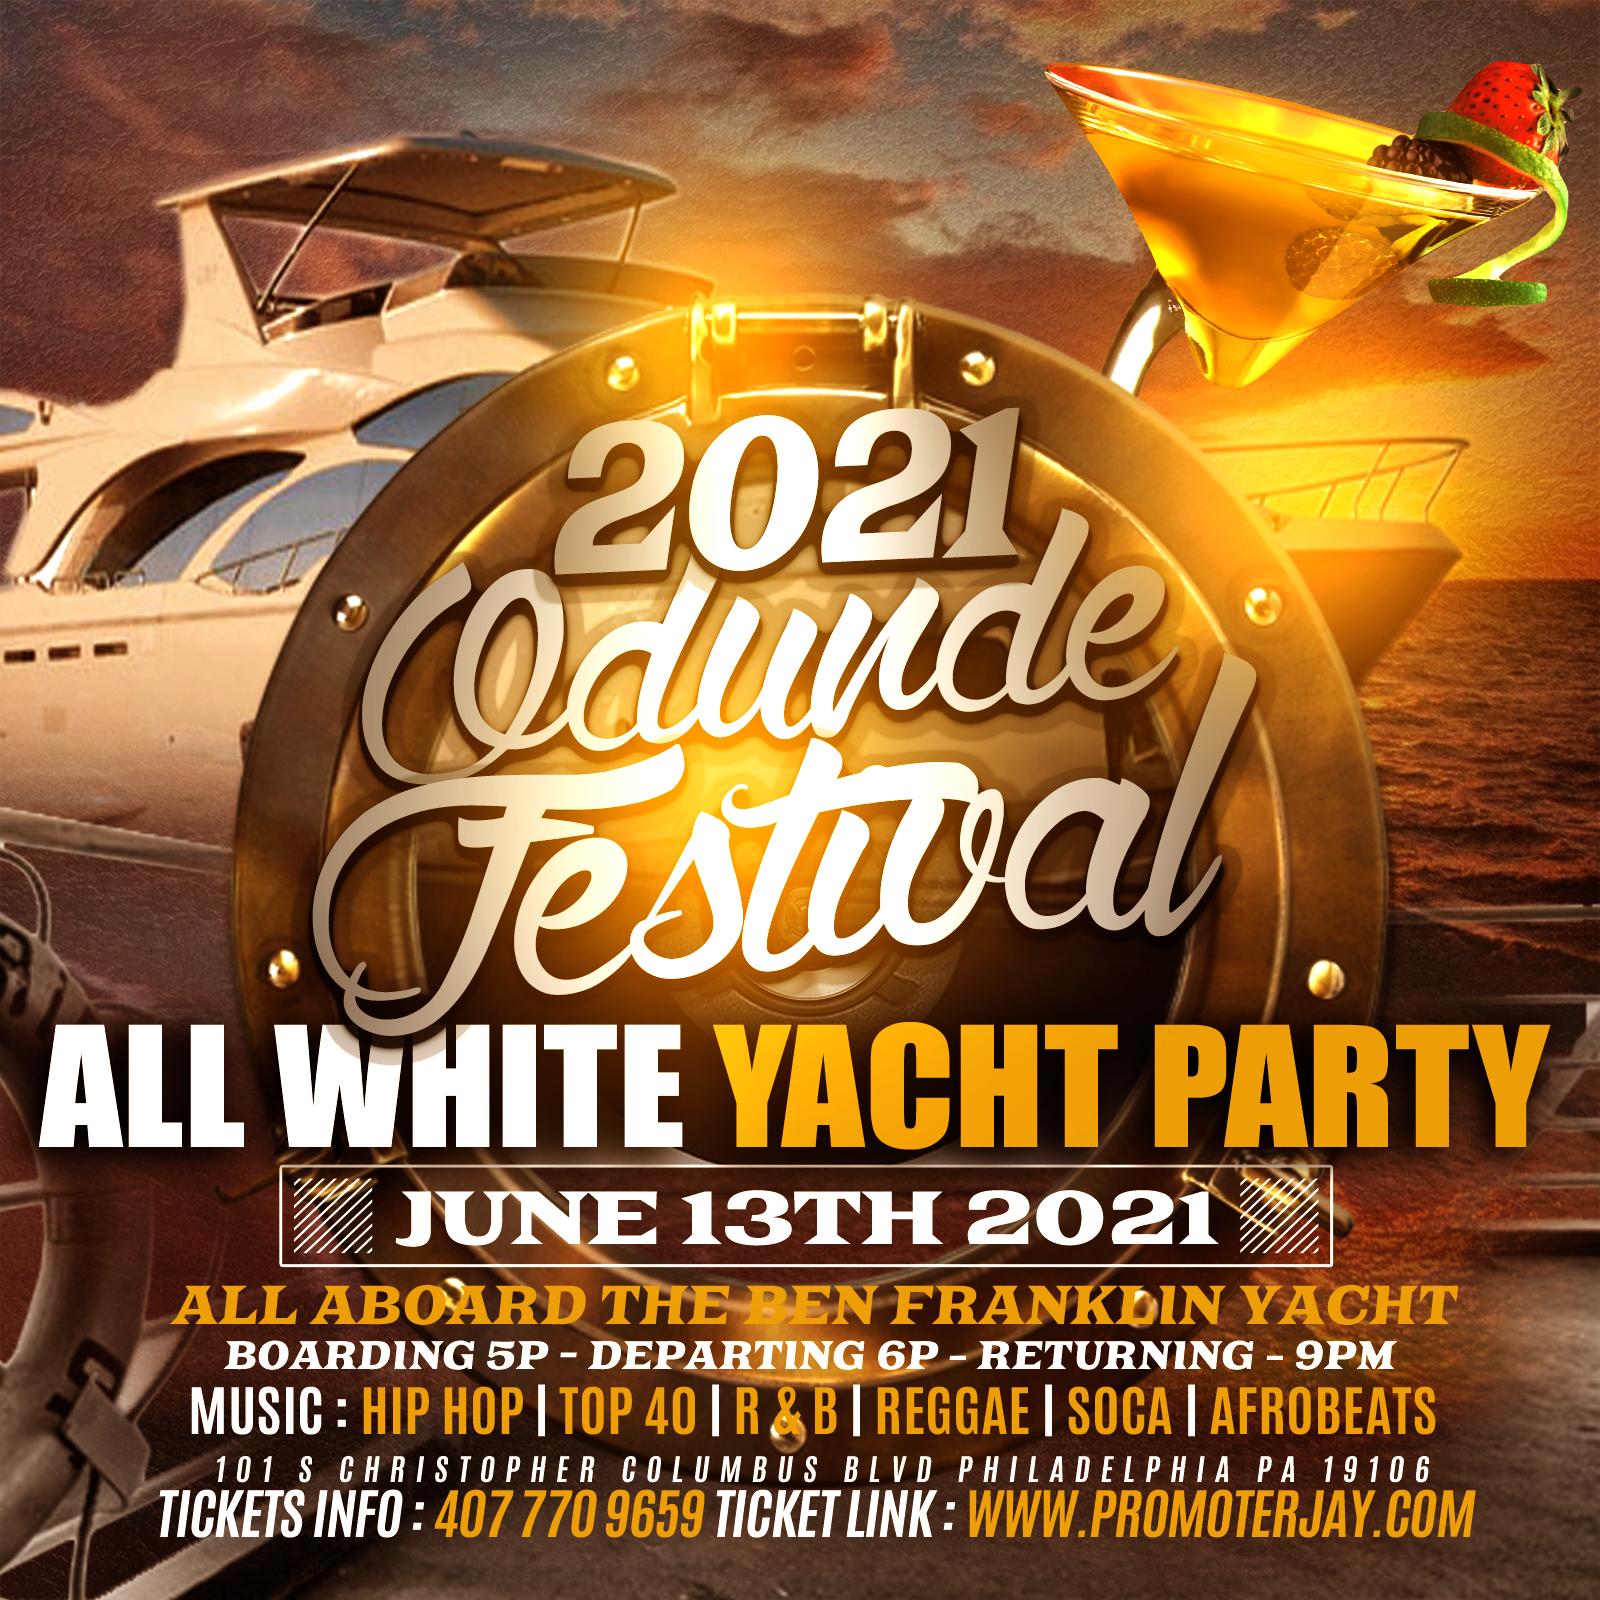 2021 Odunde Festival All White Yacht Party 13 JUN 2021